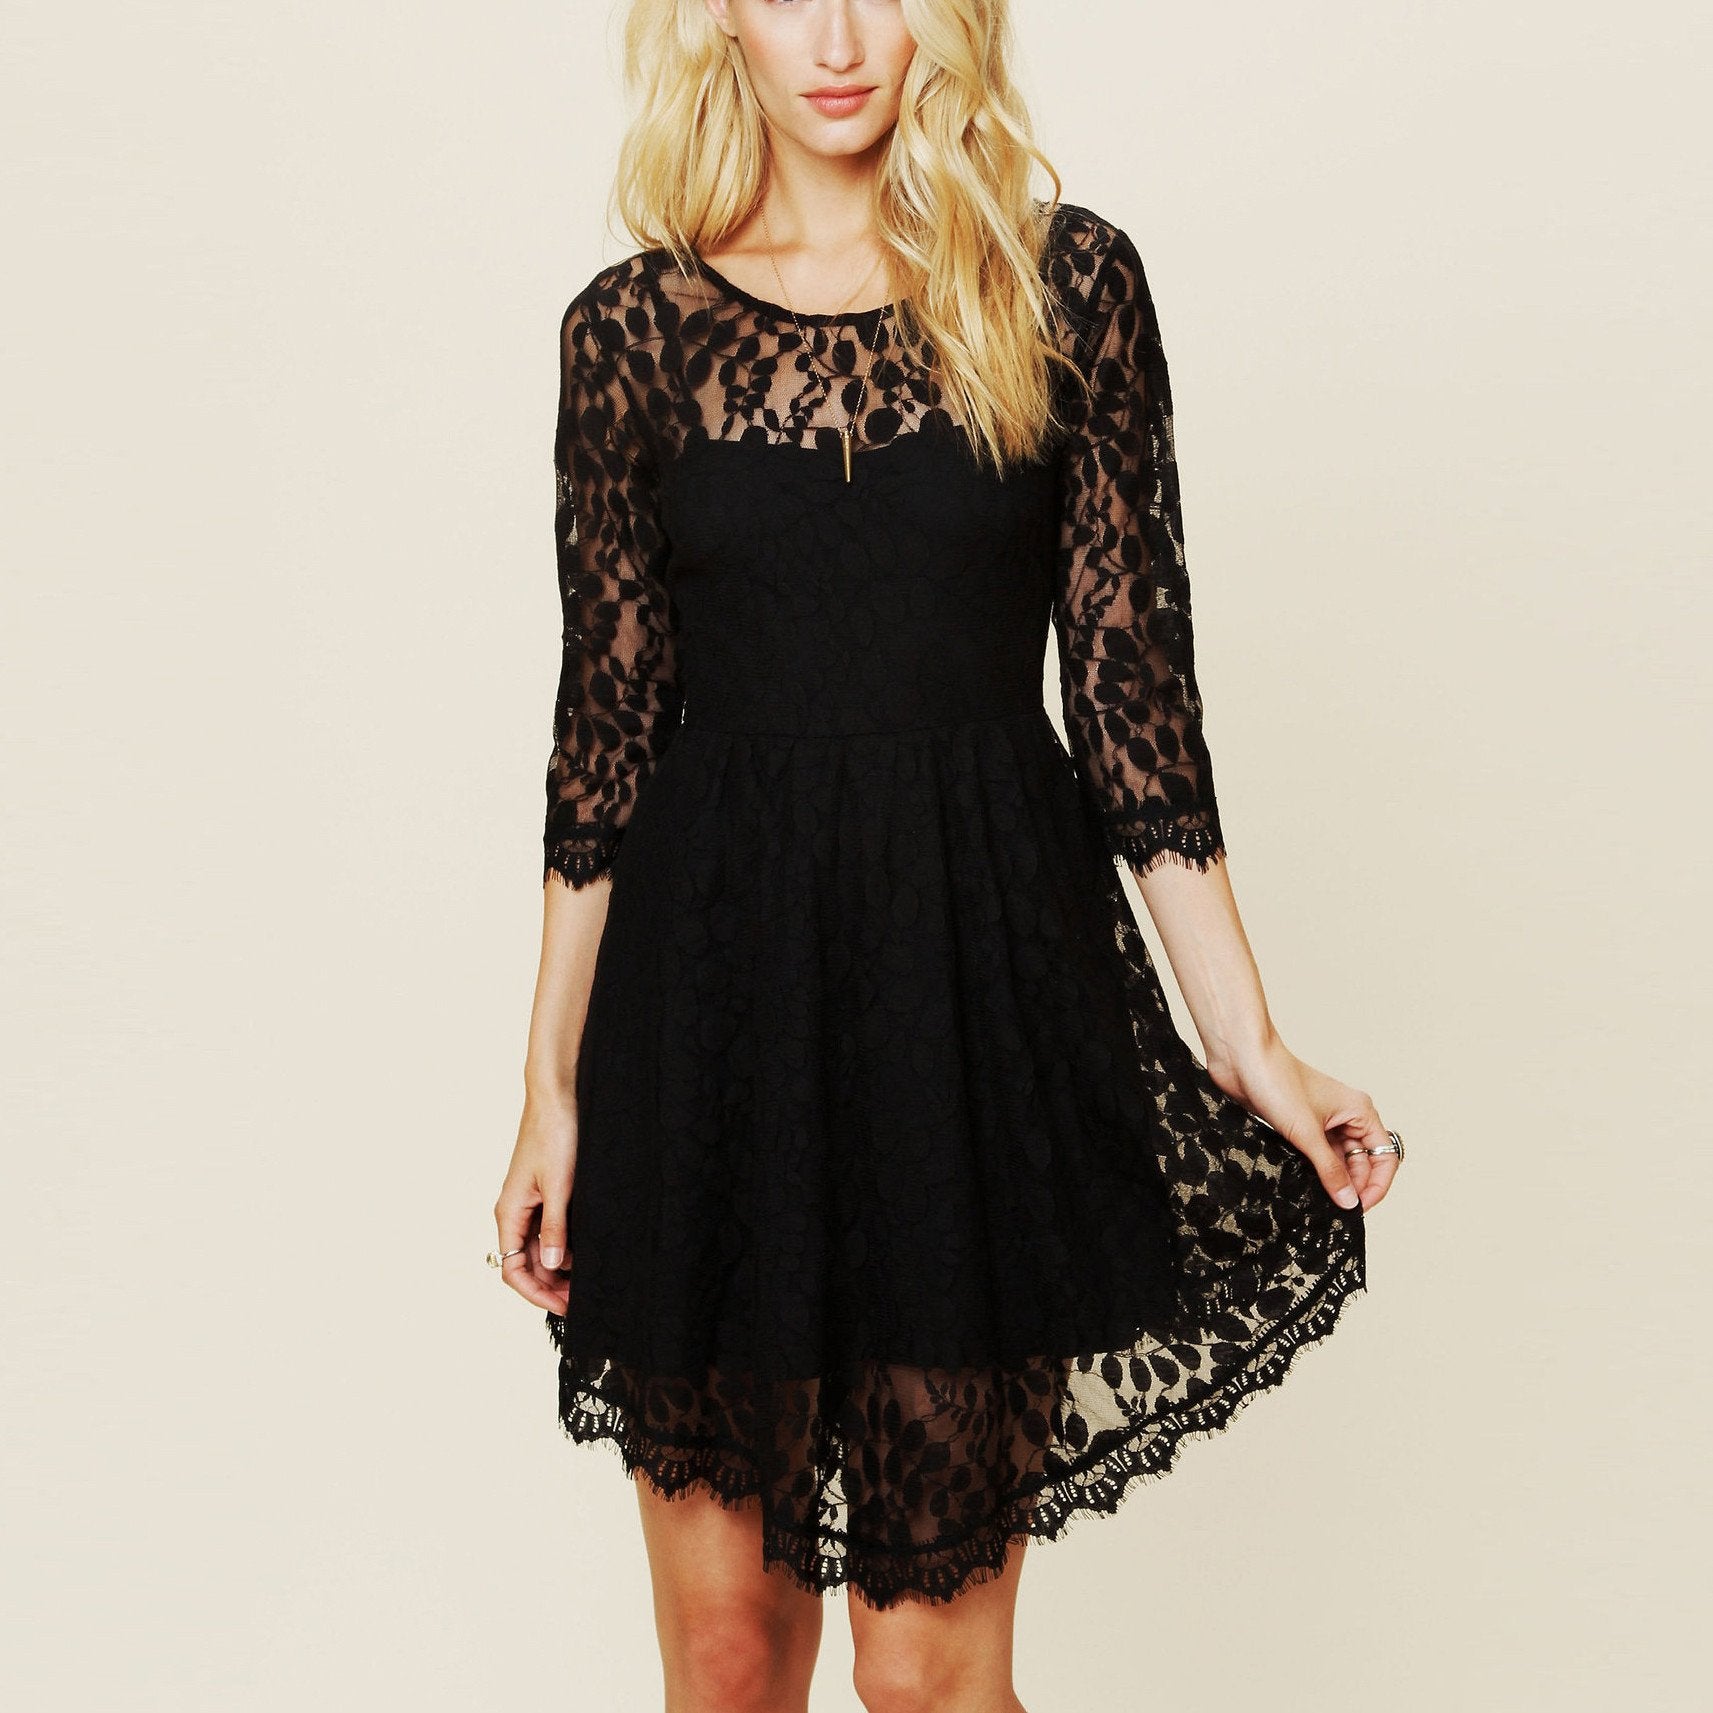 Lace Long Sleeve Pure Color O-neck Irregular Short Dress - Meet Yours Fashion - 2